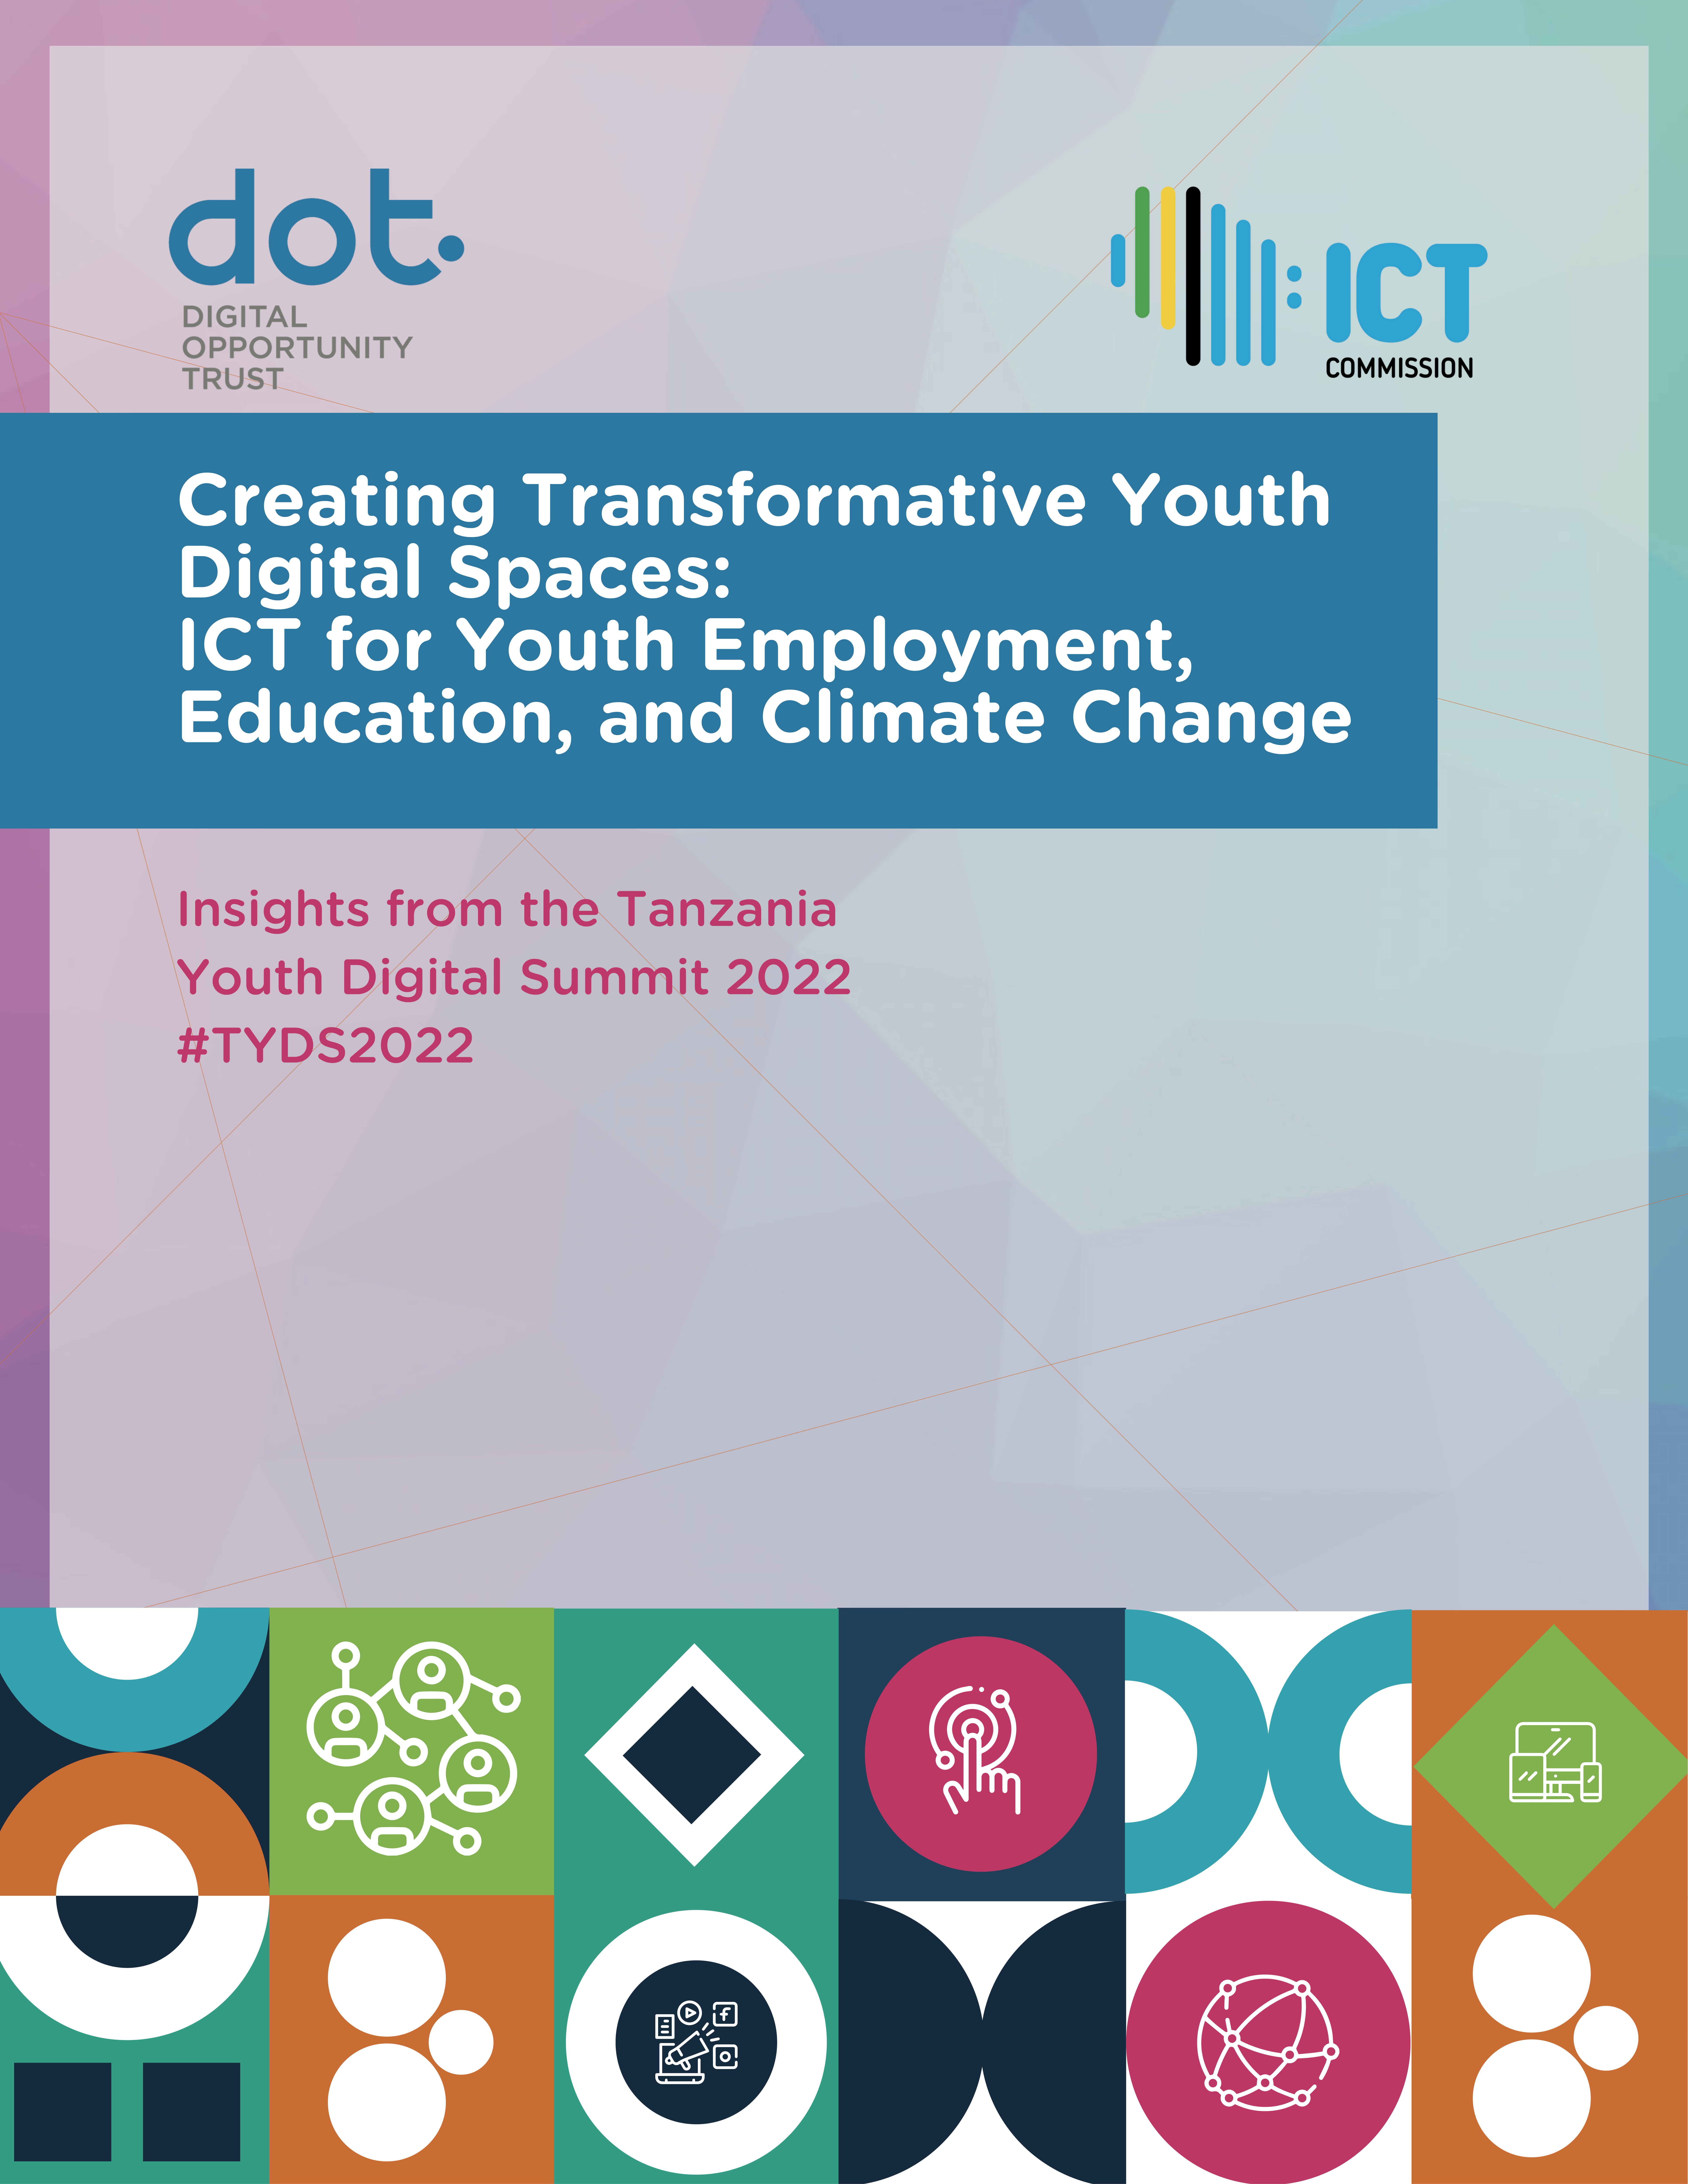 Creating Transformative Youth Digital Spaces: ICT for Youth Employment, Education, and Climate Change